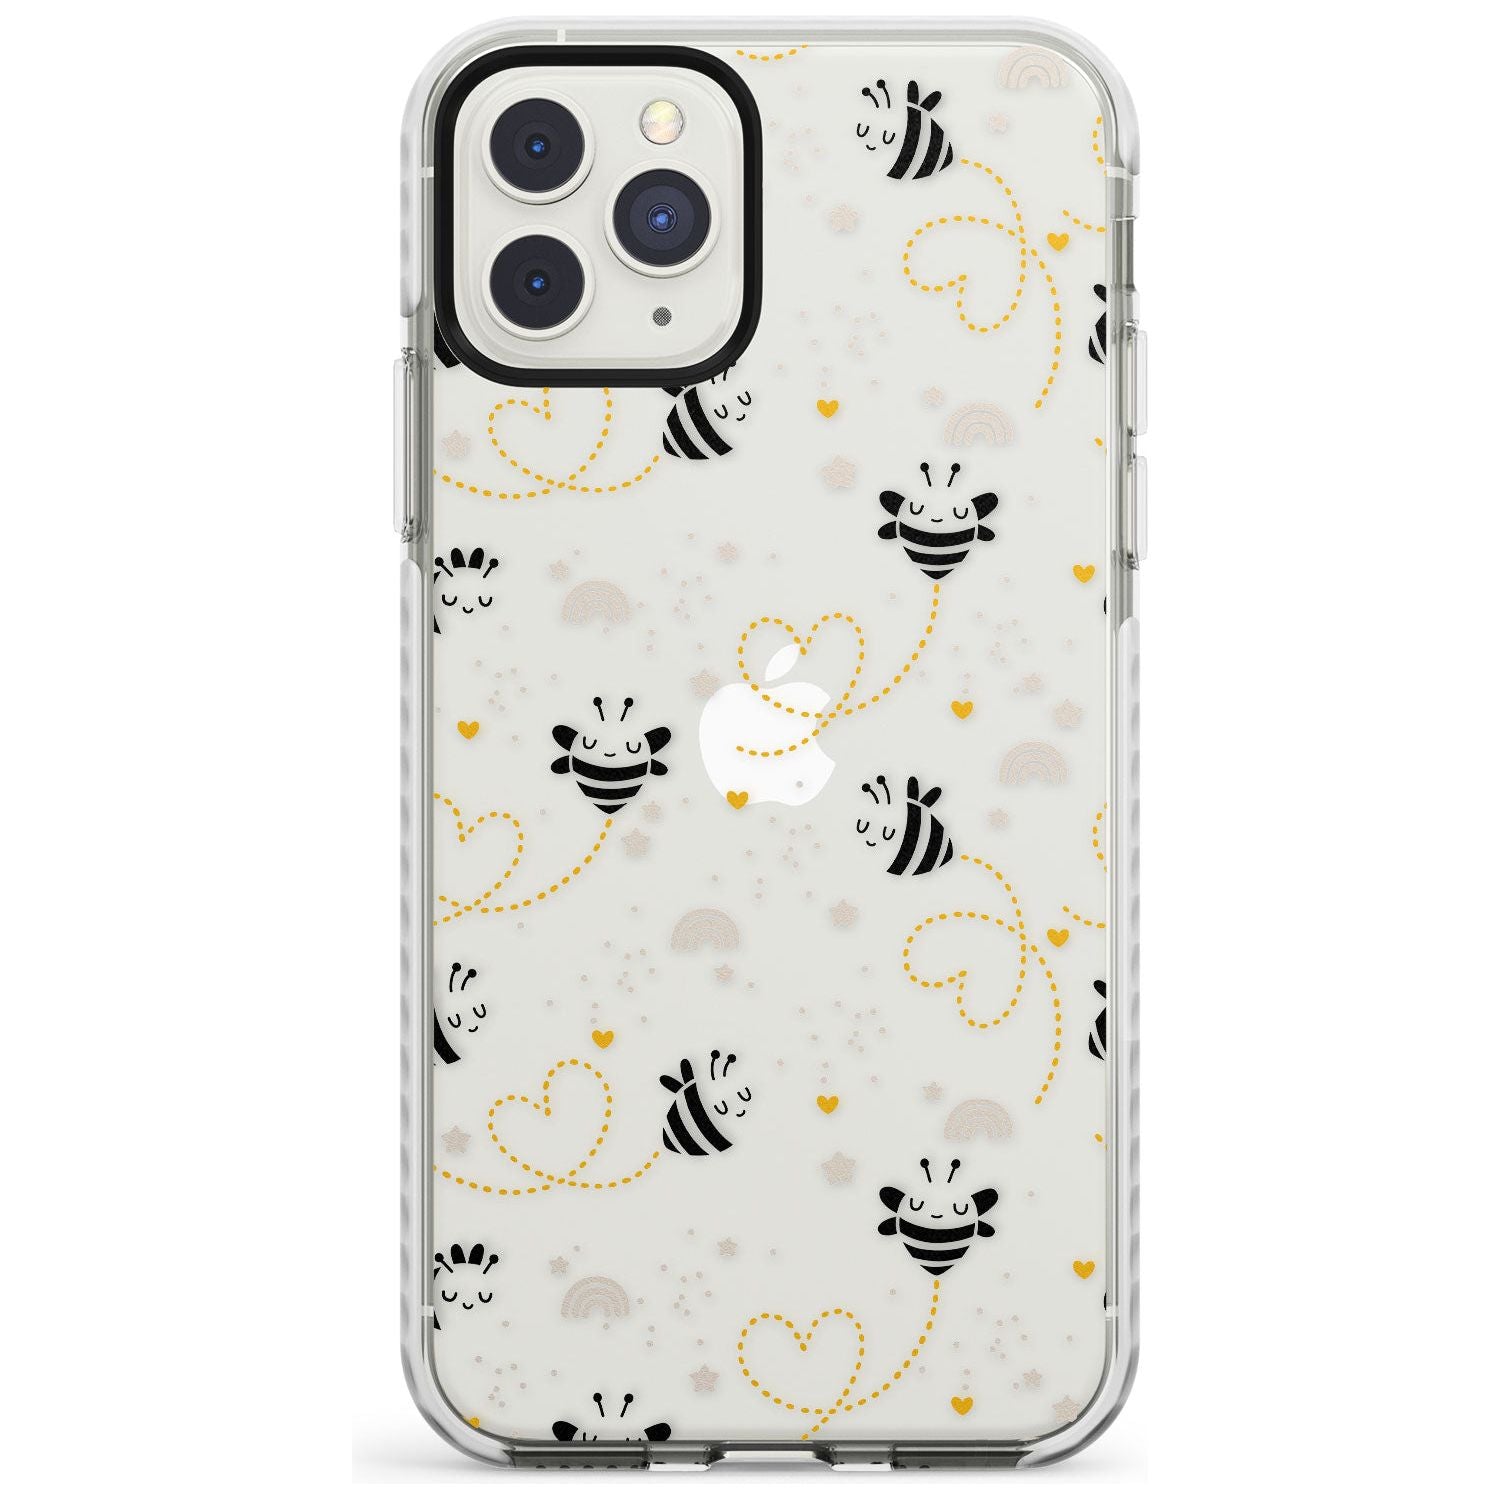 Sweet as Honey Patterns: Bees & Hearts (Clear) Impact Phone Case for iPhone 11 Pro Max